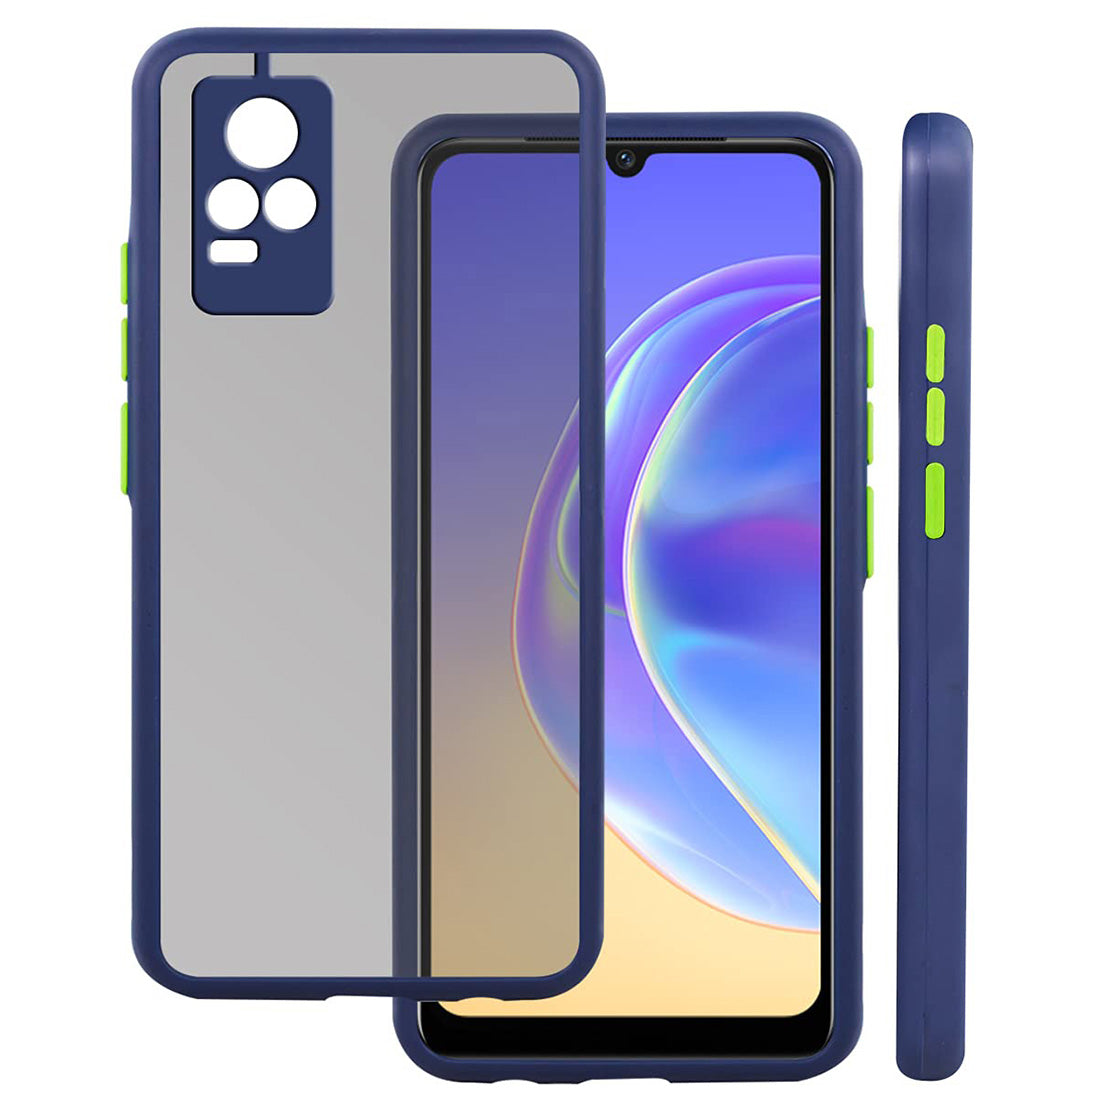 Smoke Back Case Cover for Vivo Y73 4G